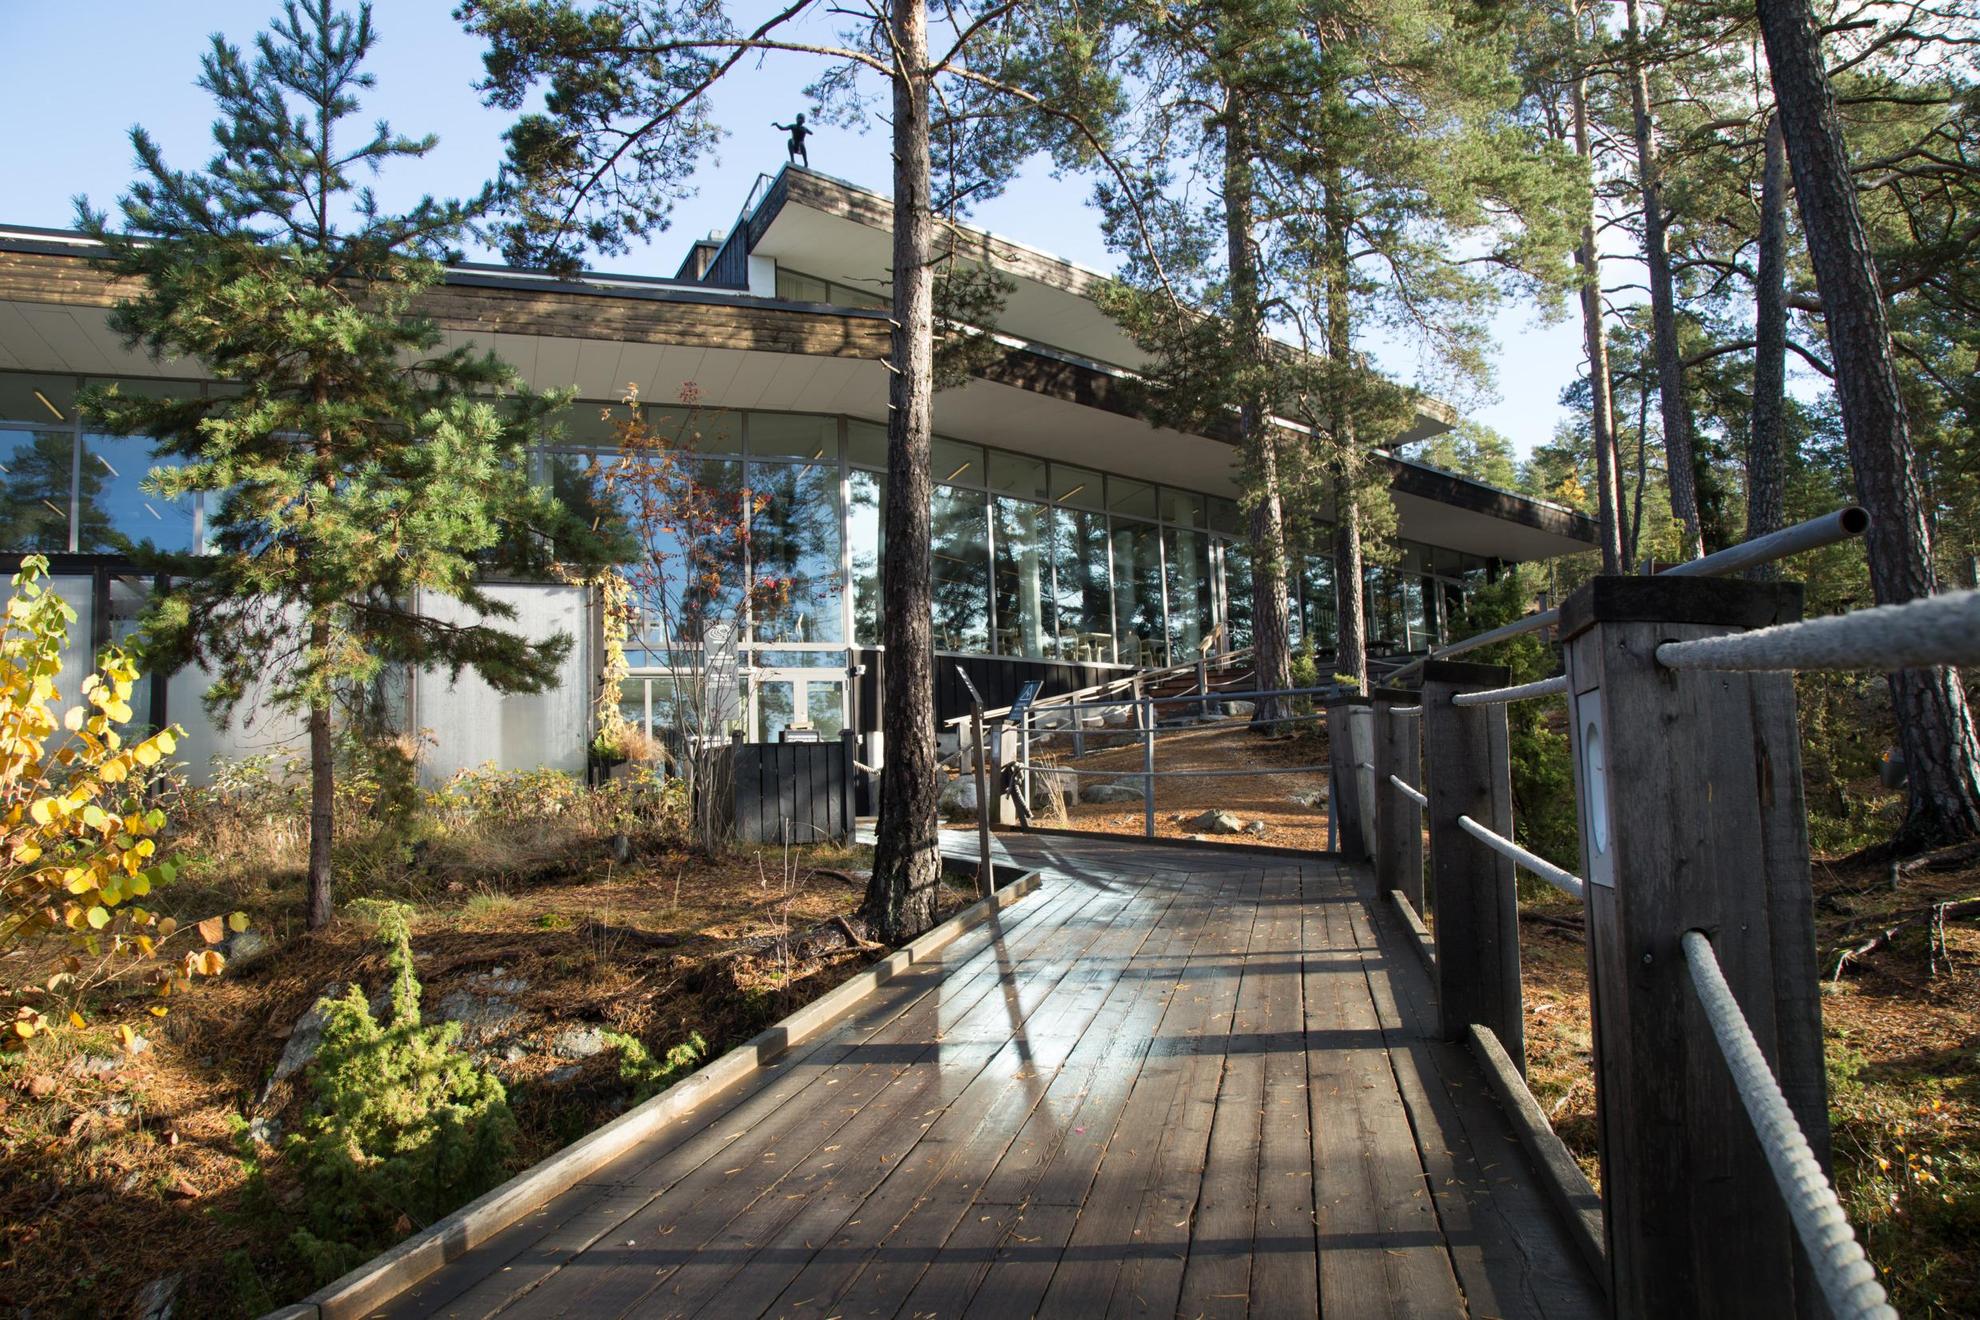 A wooden walkway in the nature that leads up to a house with window walls.